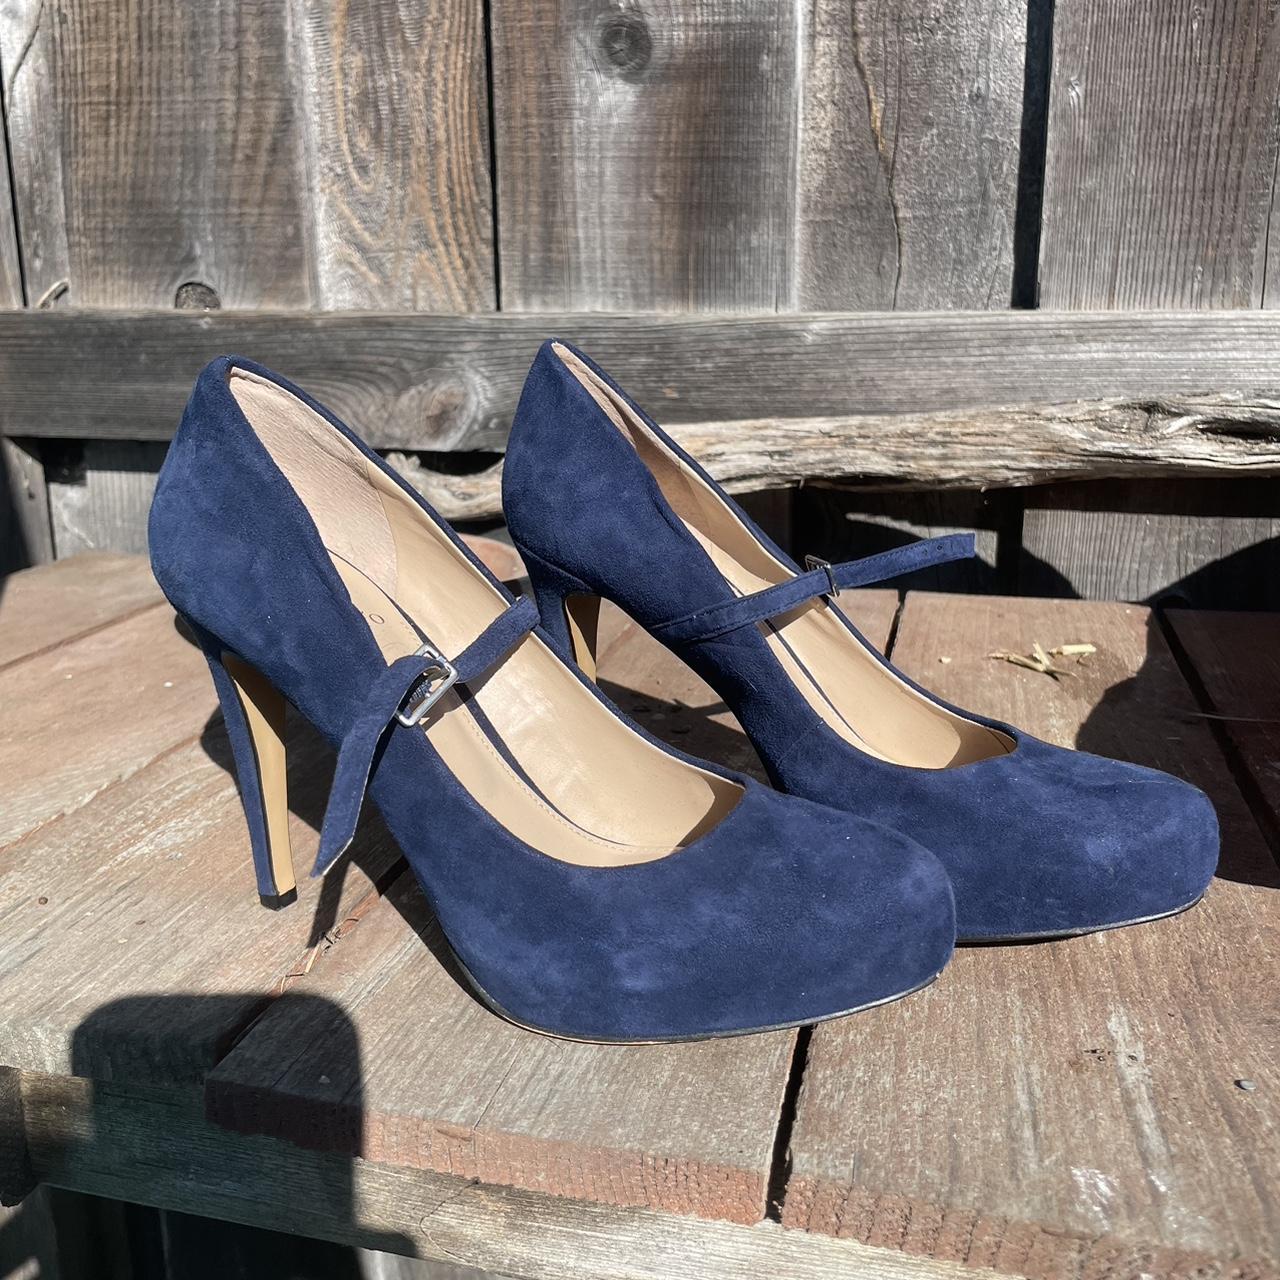 Vince Camuto Women's Navy Courts (5)